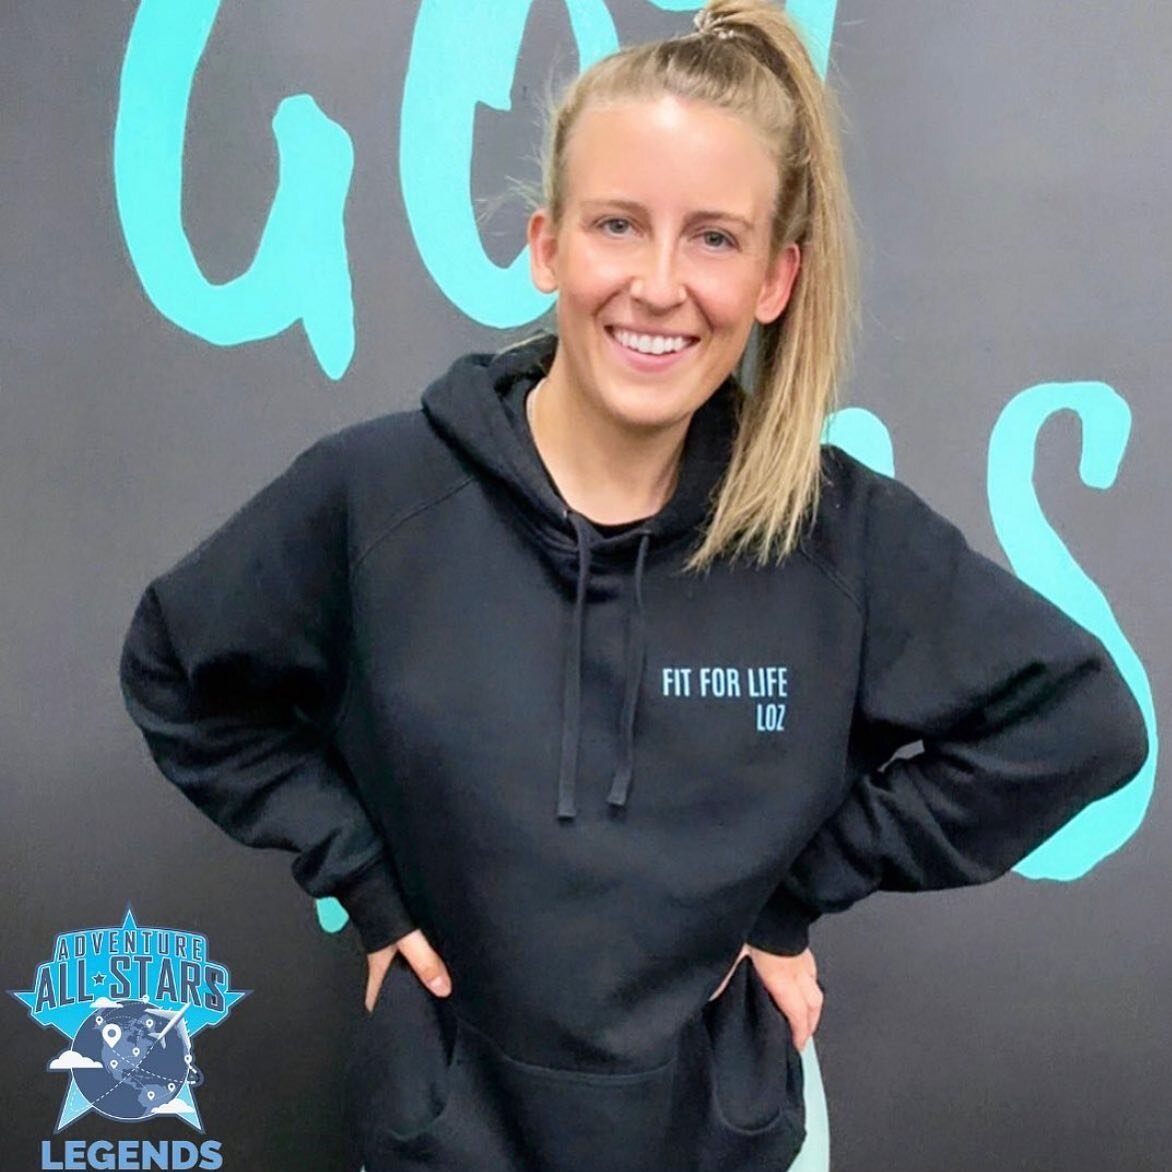 We have super dooper exciting news 🤩

Our very own boss lady Lozzie has been invited to star in the @adventureallstarstv LEGENDS series! 😱

After previously raising funds for @musculardystrophyaustralia and filming with the show last July (episode 